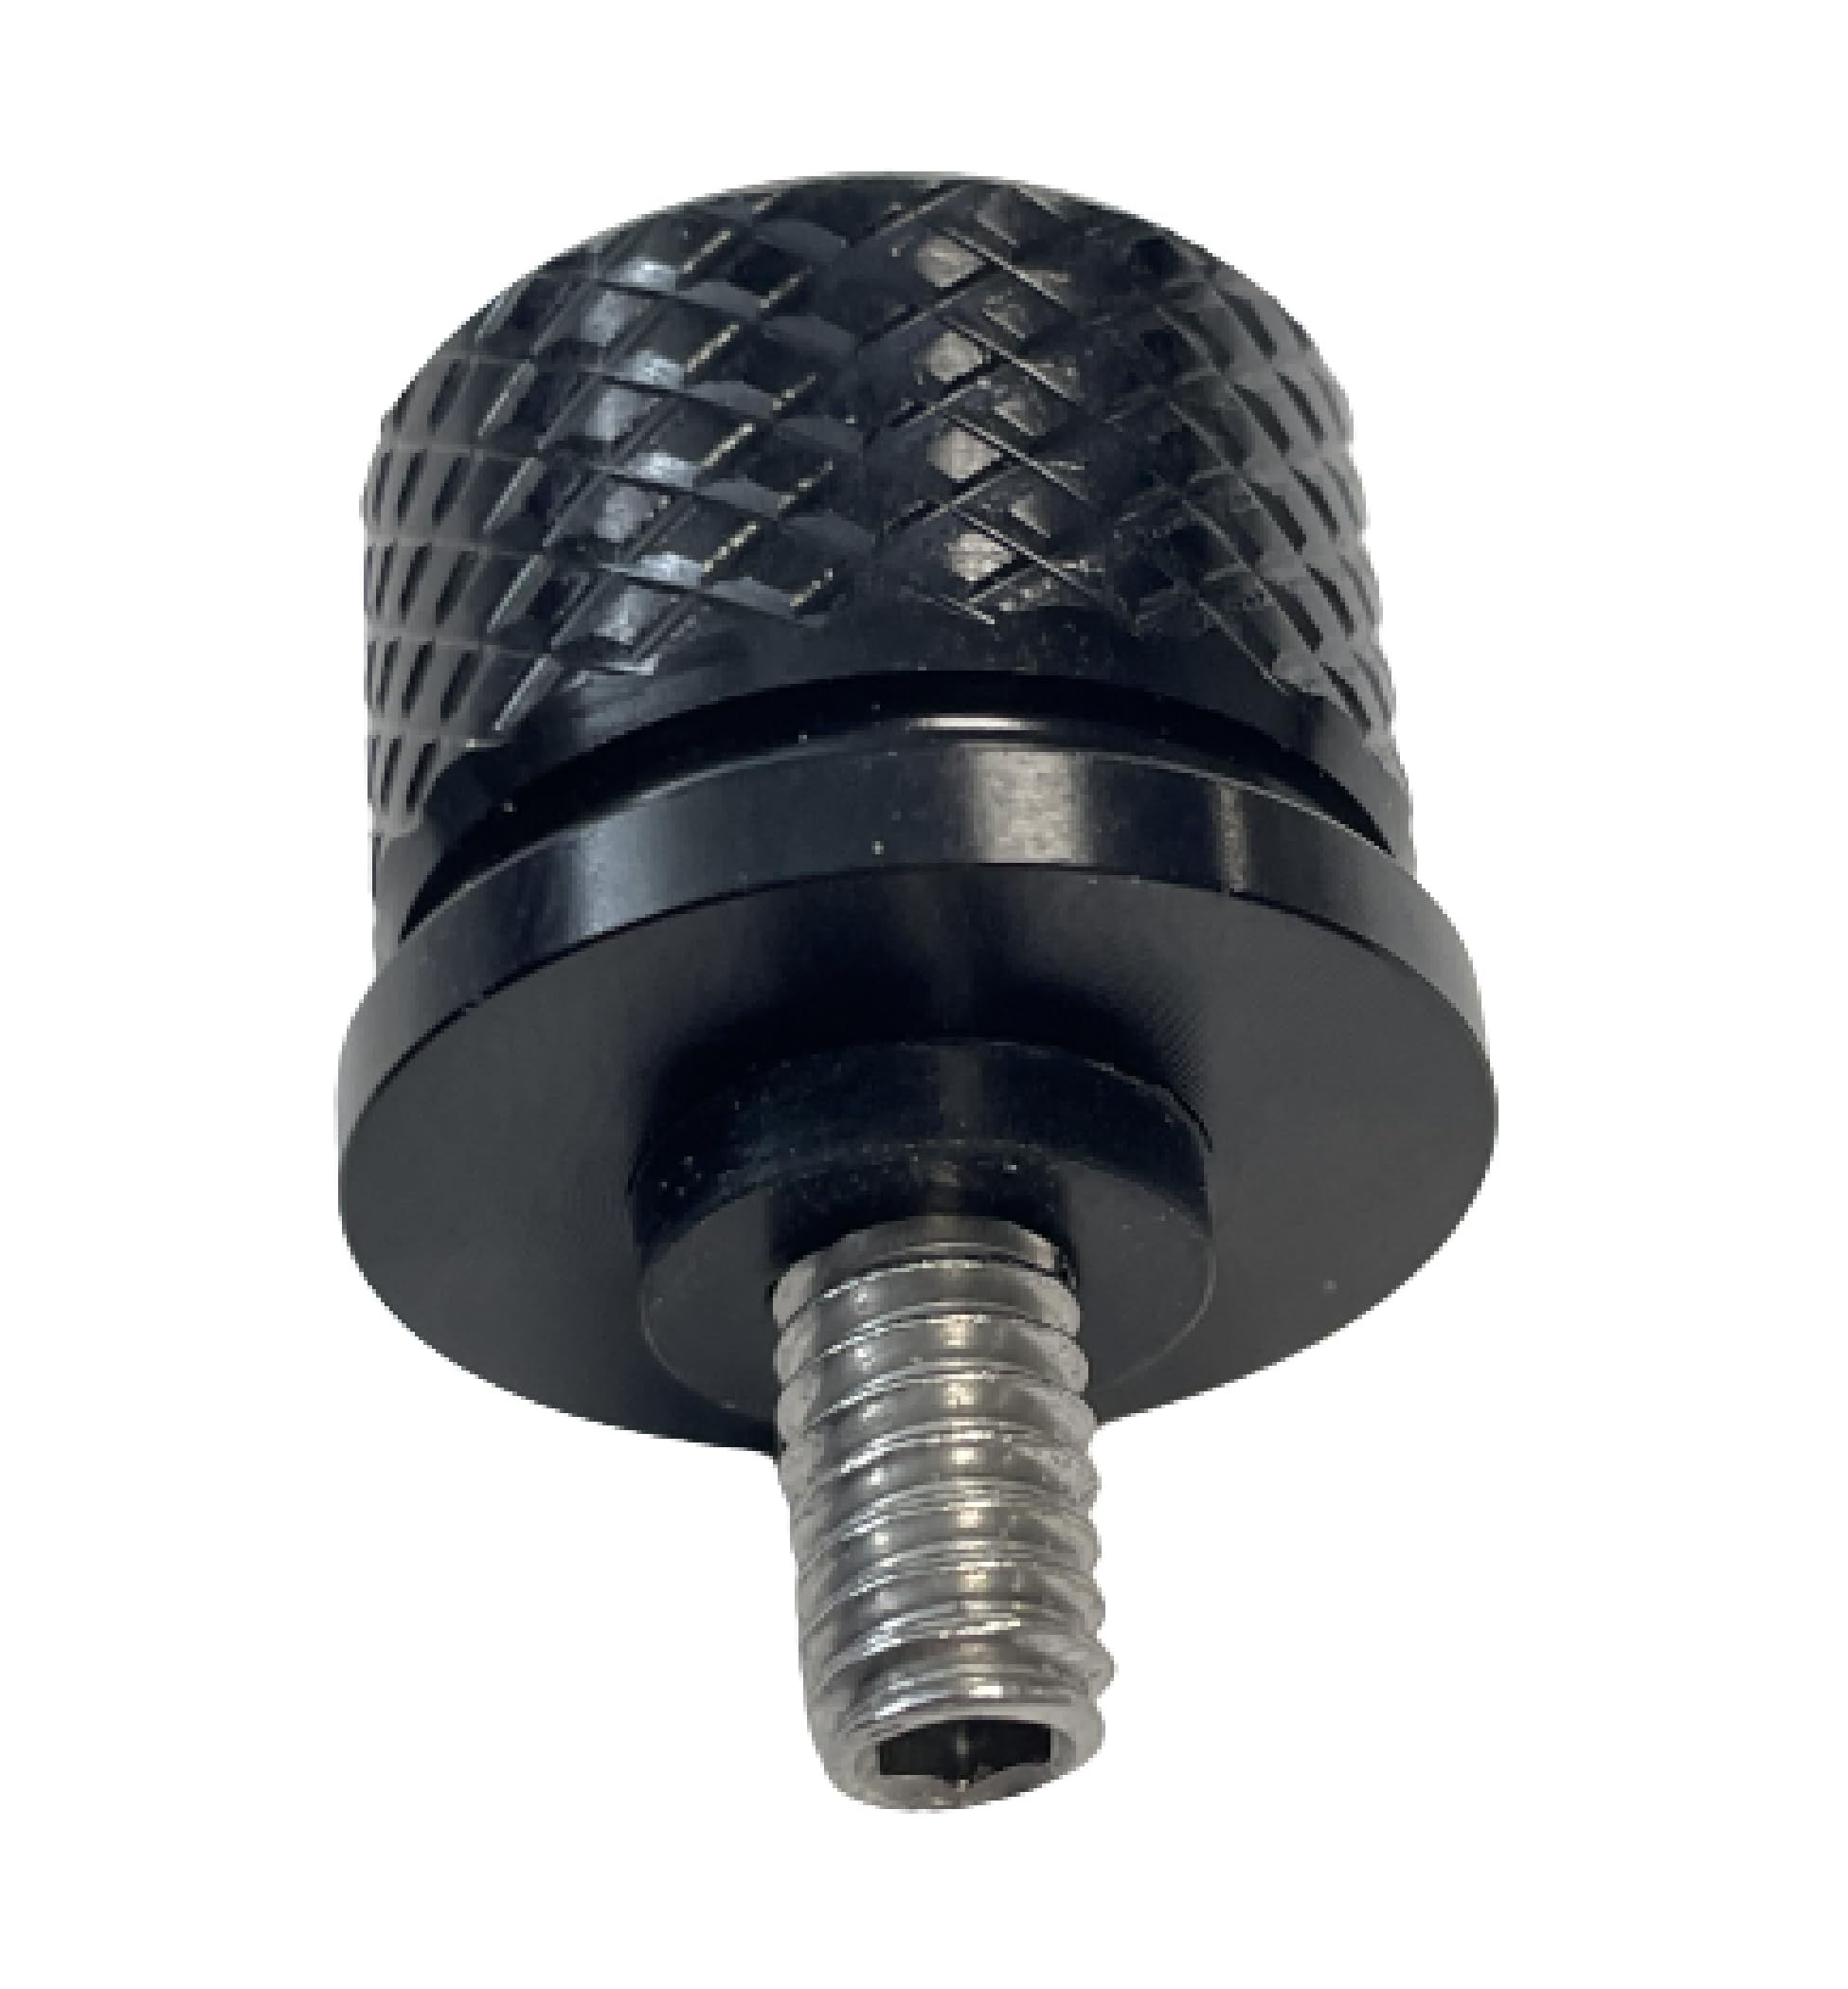 Don't Fuckin Die Large Knurled Aluminum Rear 1/4-20 Black Seat Bolt Fits Harley Davidson 1996-2024+. Custom Made in The USA